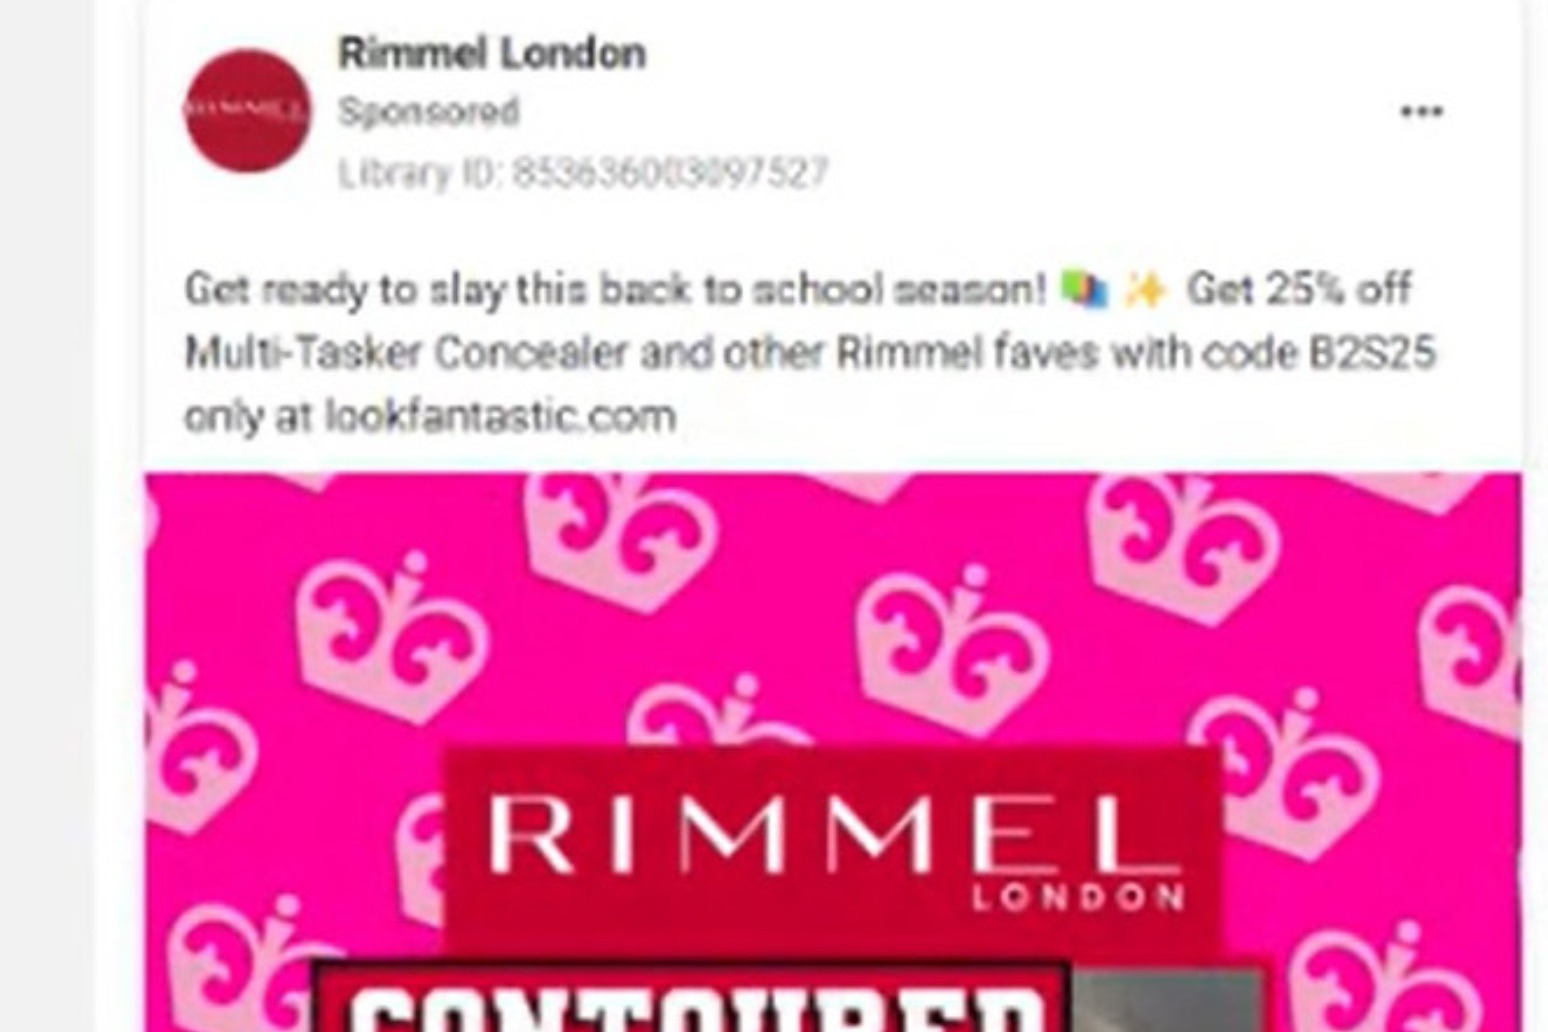 Rimmel London ad banned for implying girls need make-up at school to succeed 